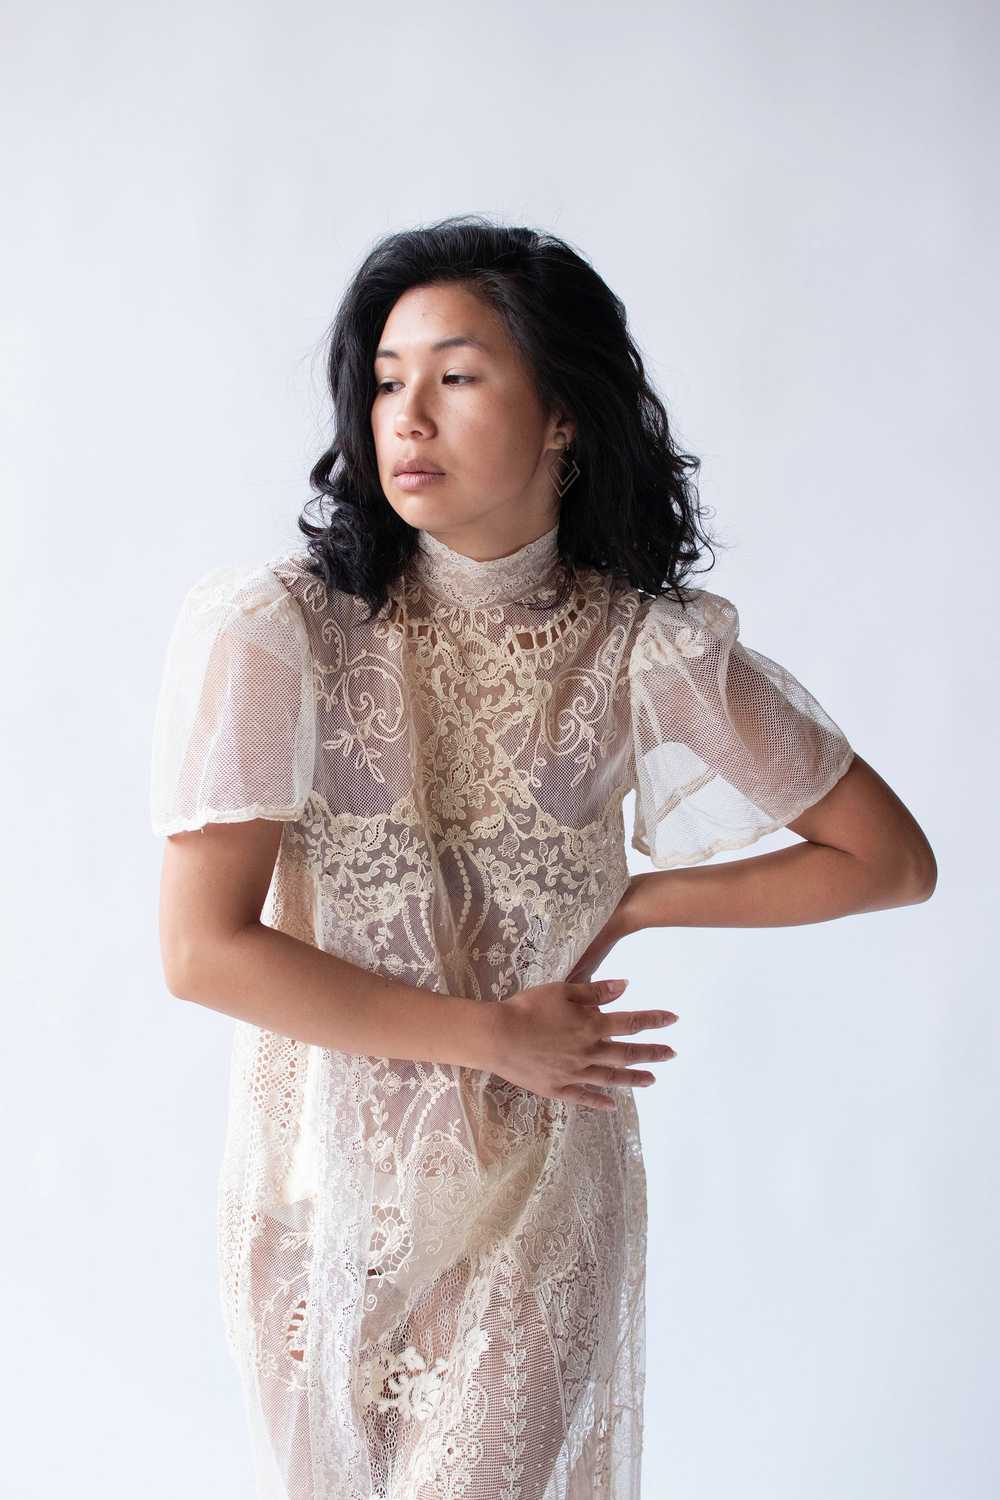 1980s Lace Works Dress - image 7